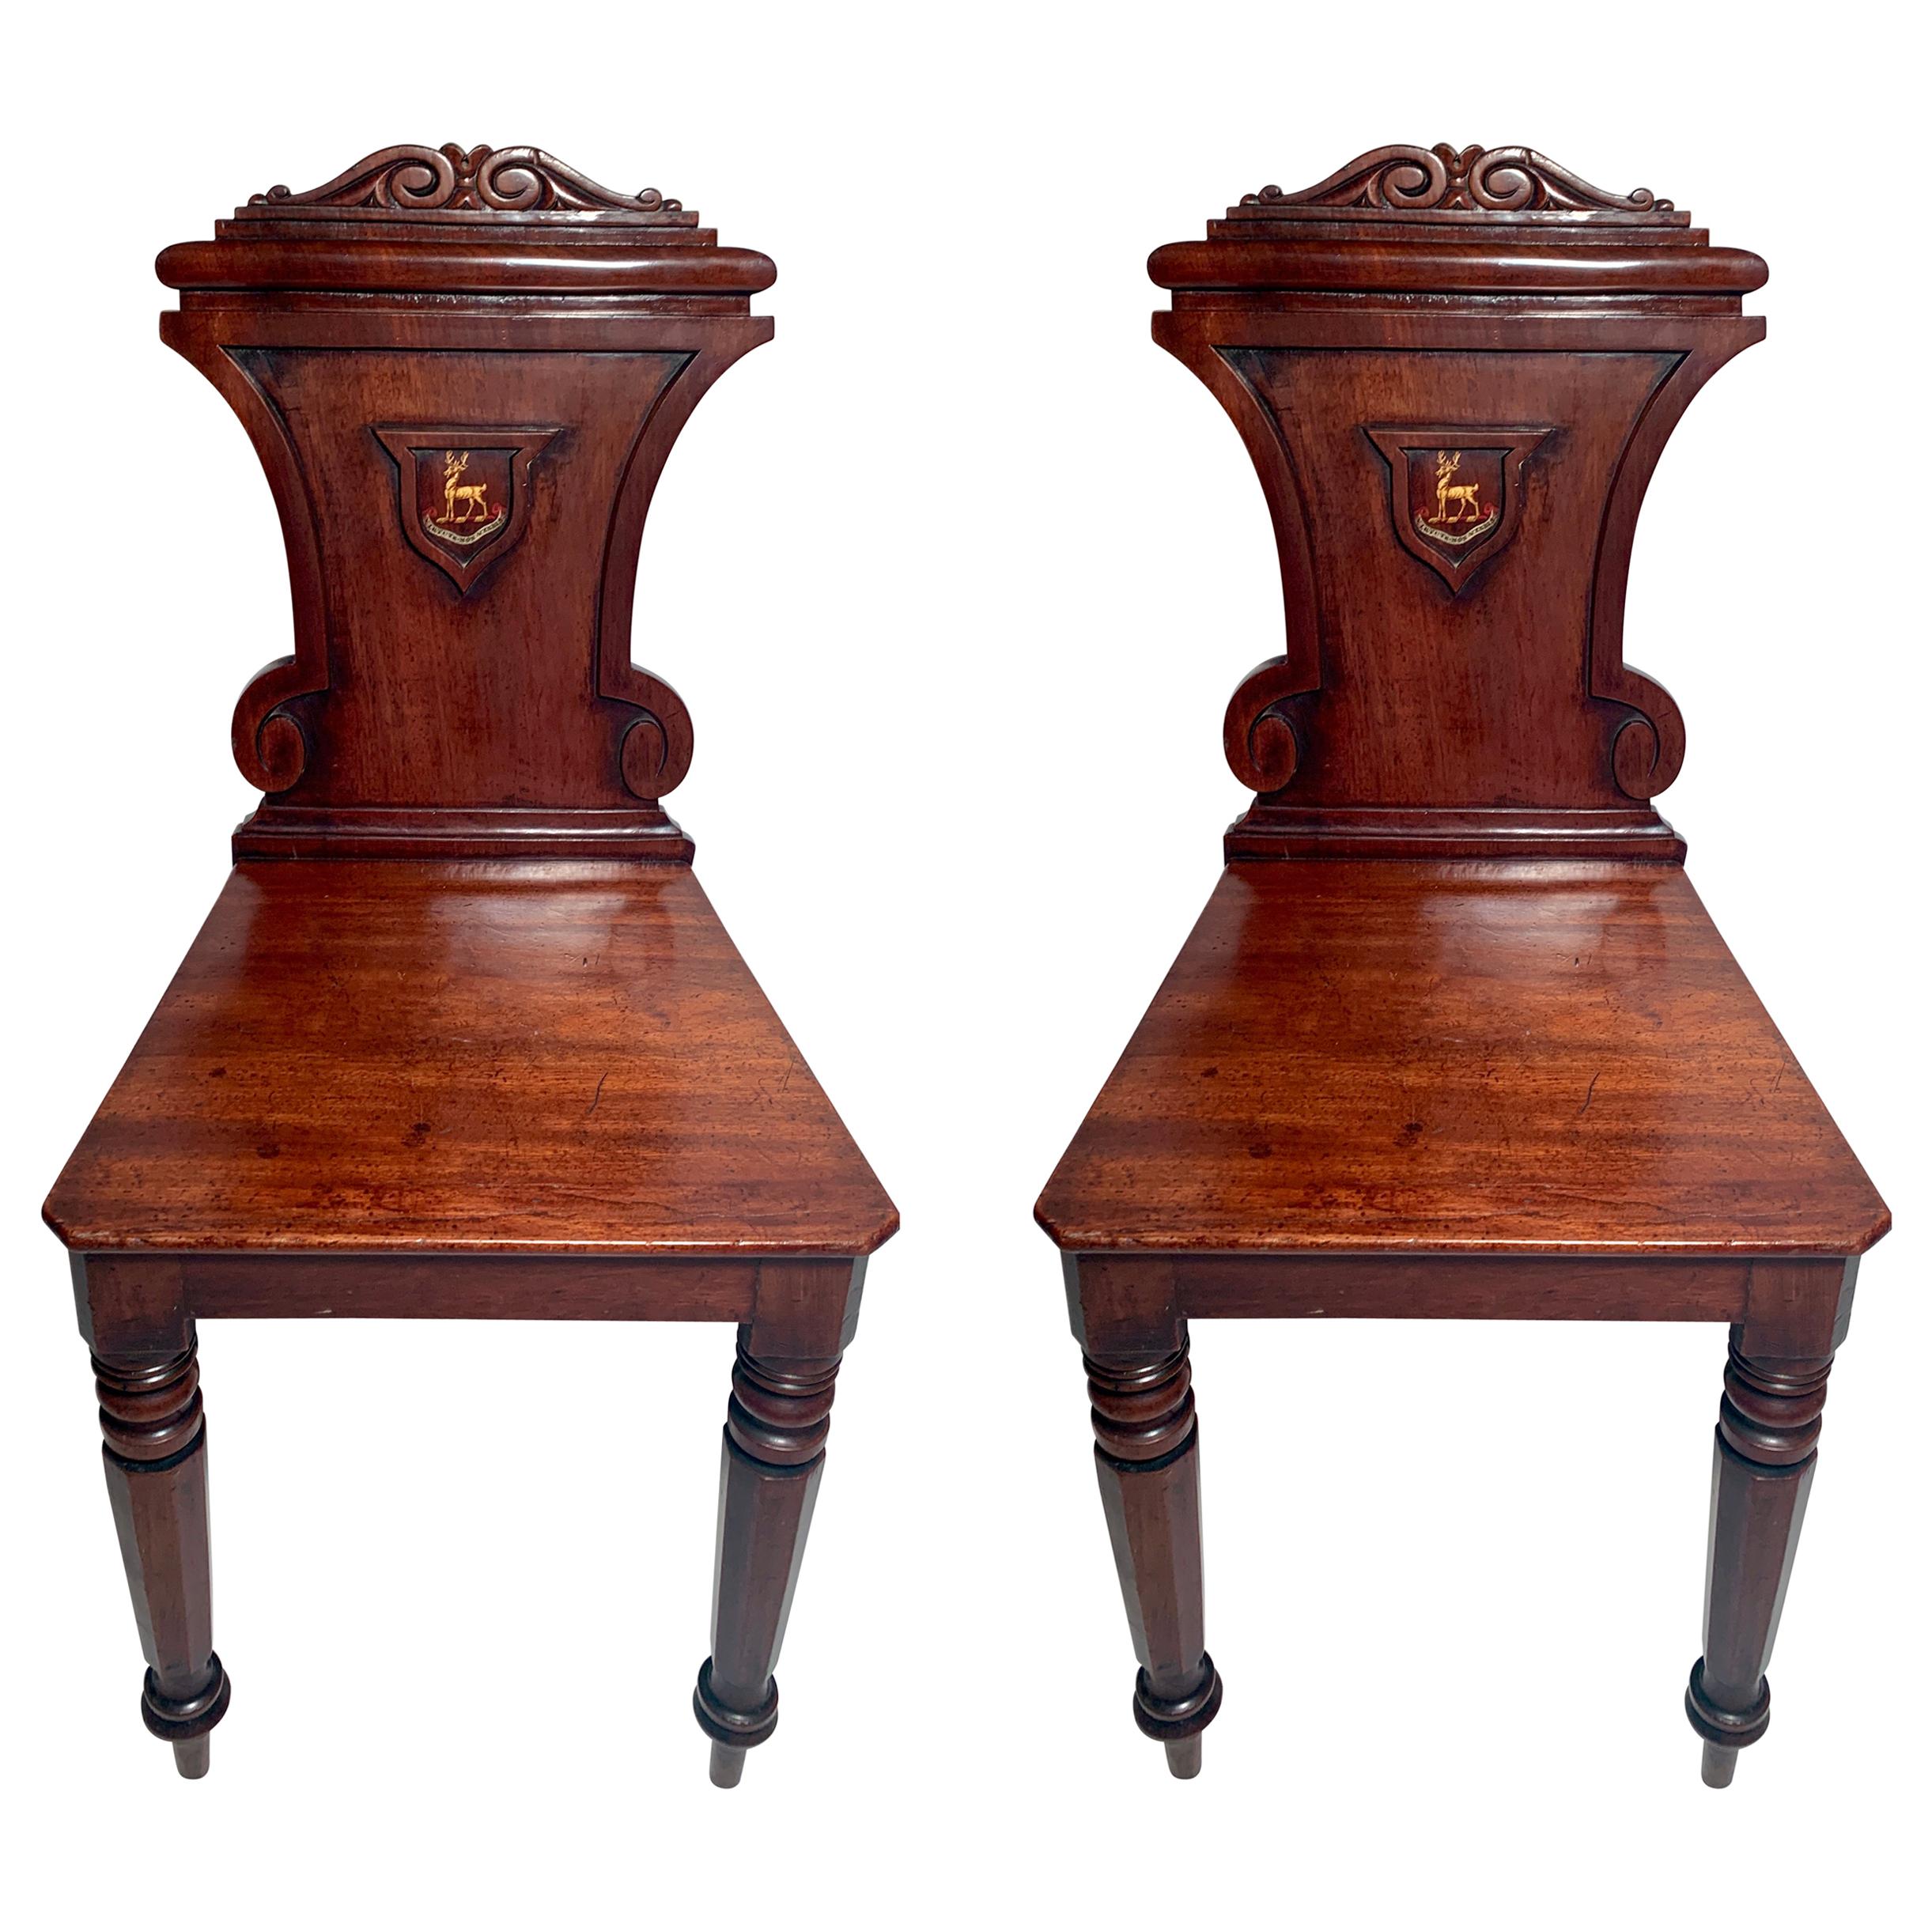 Pair of English Mahogany Wine Room Chairs "Virtute Non Verbis" For Sale